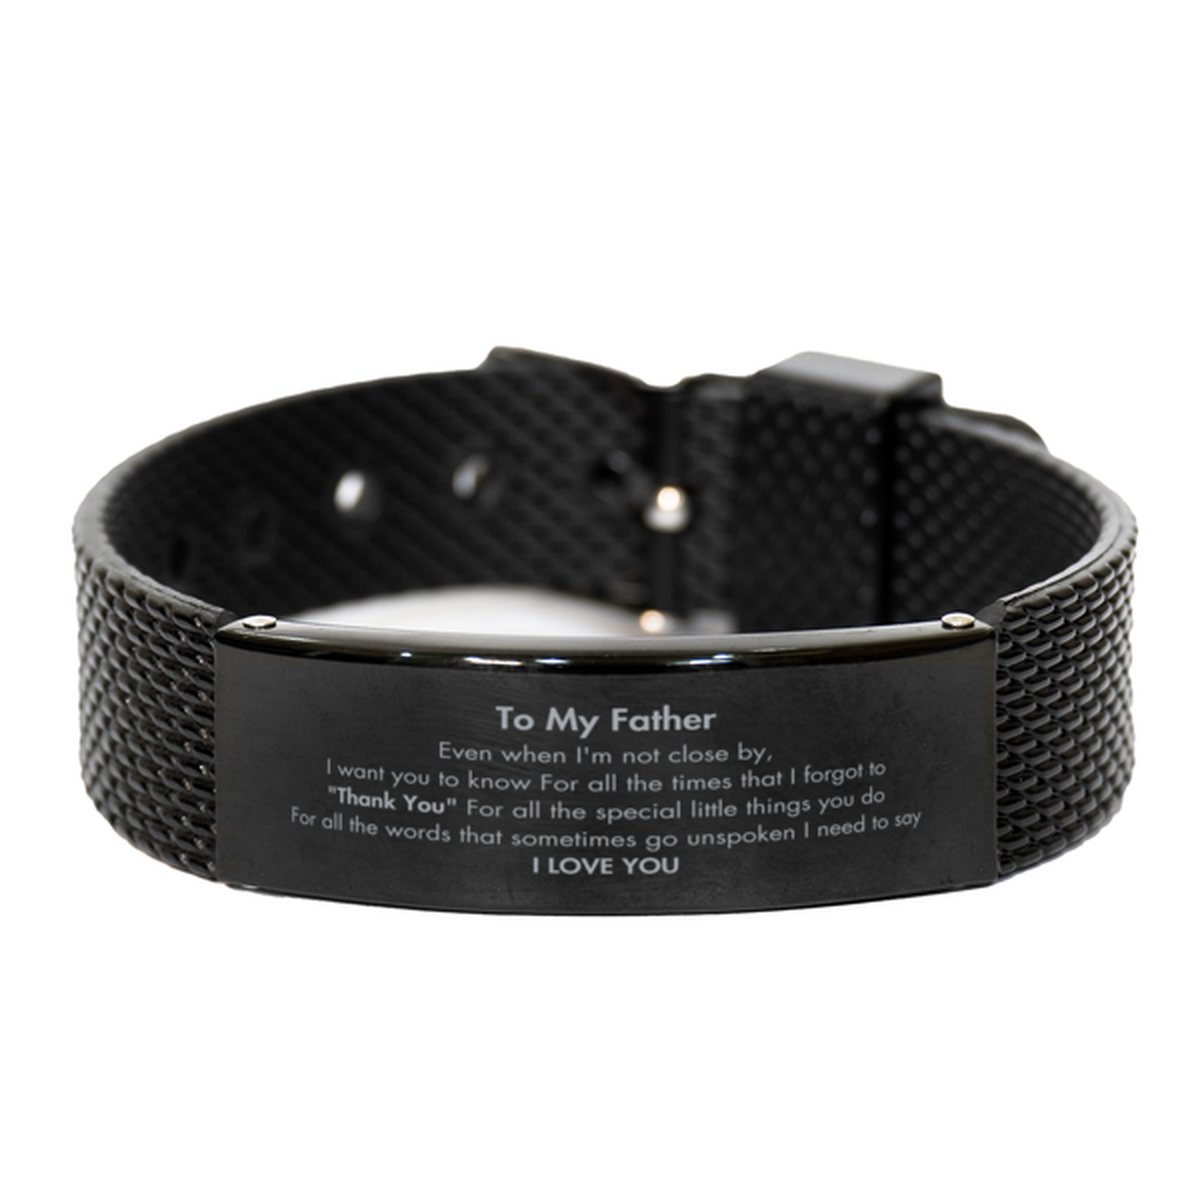 Thank You Gifts for Father, Keepsake Black Shark Mesh Bracelet Gifts for Father Birthday Mother's day Father's Day Father For all the words That sometimes go unspoken I need to say I LOVE YOU